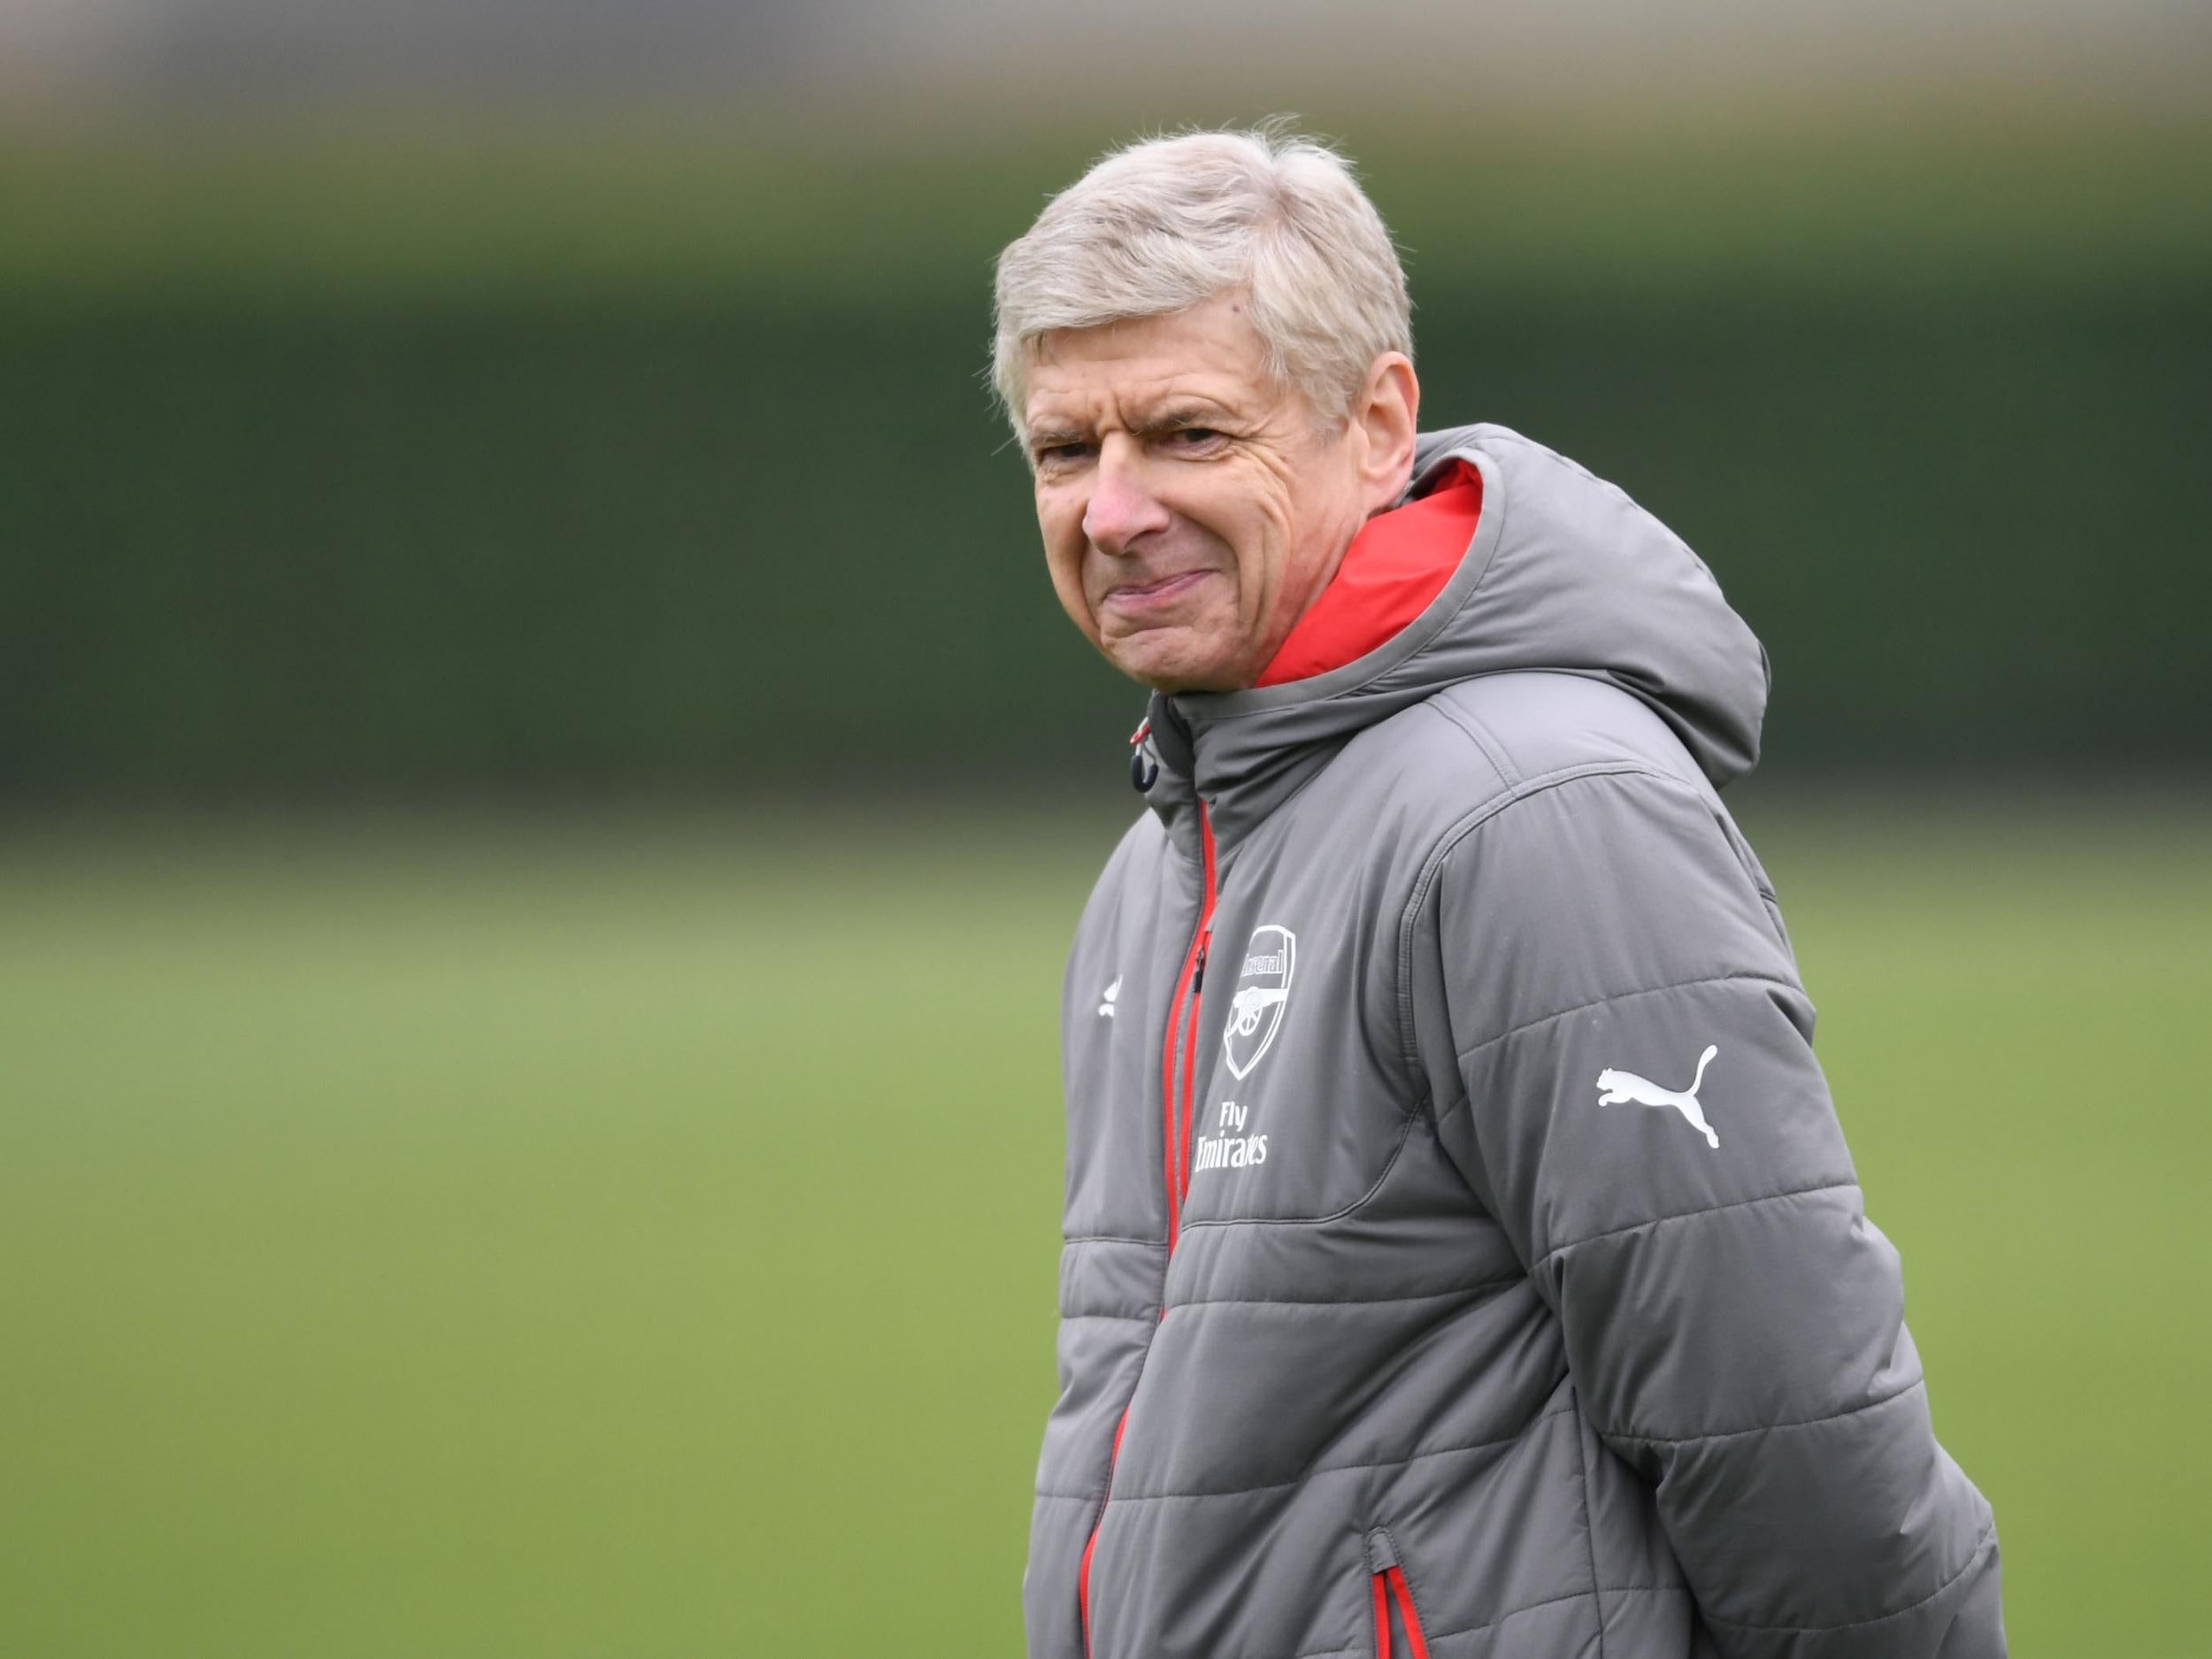 The status quo looks set to be maintained at Arsenal with Wenger continuing to wield much of the power